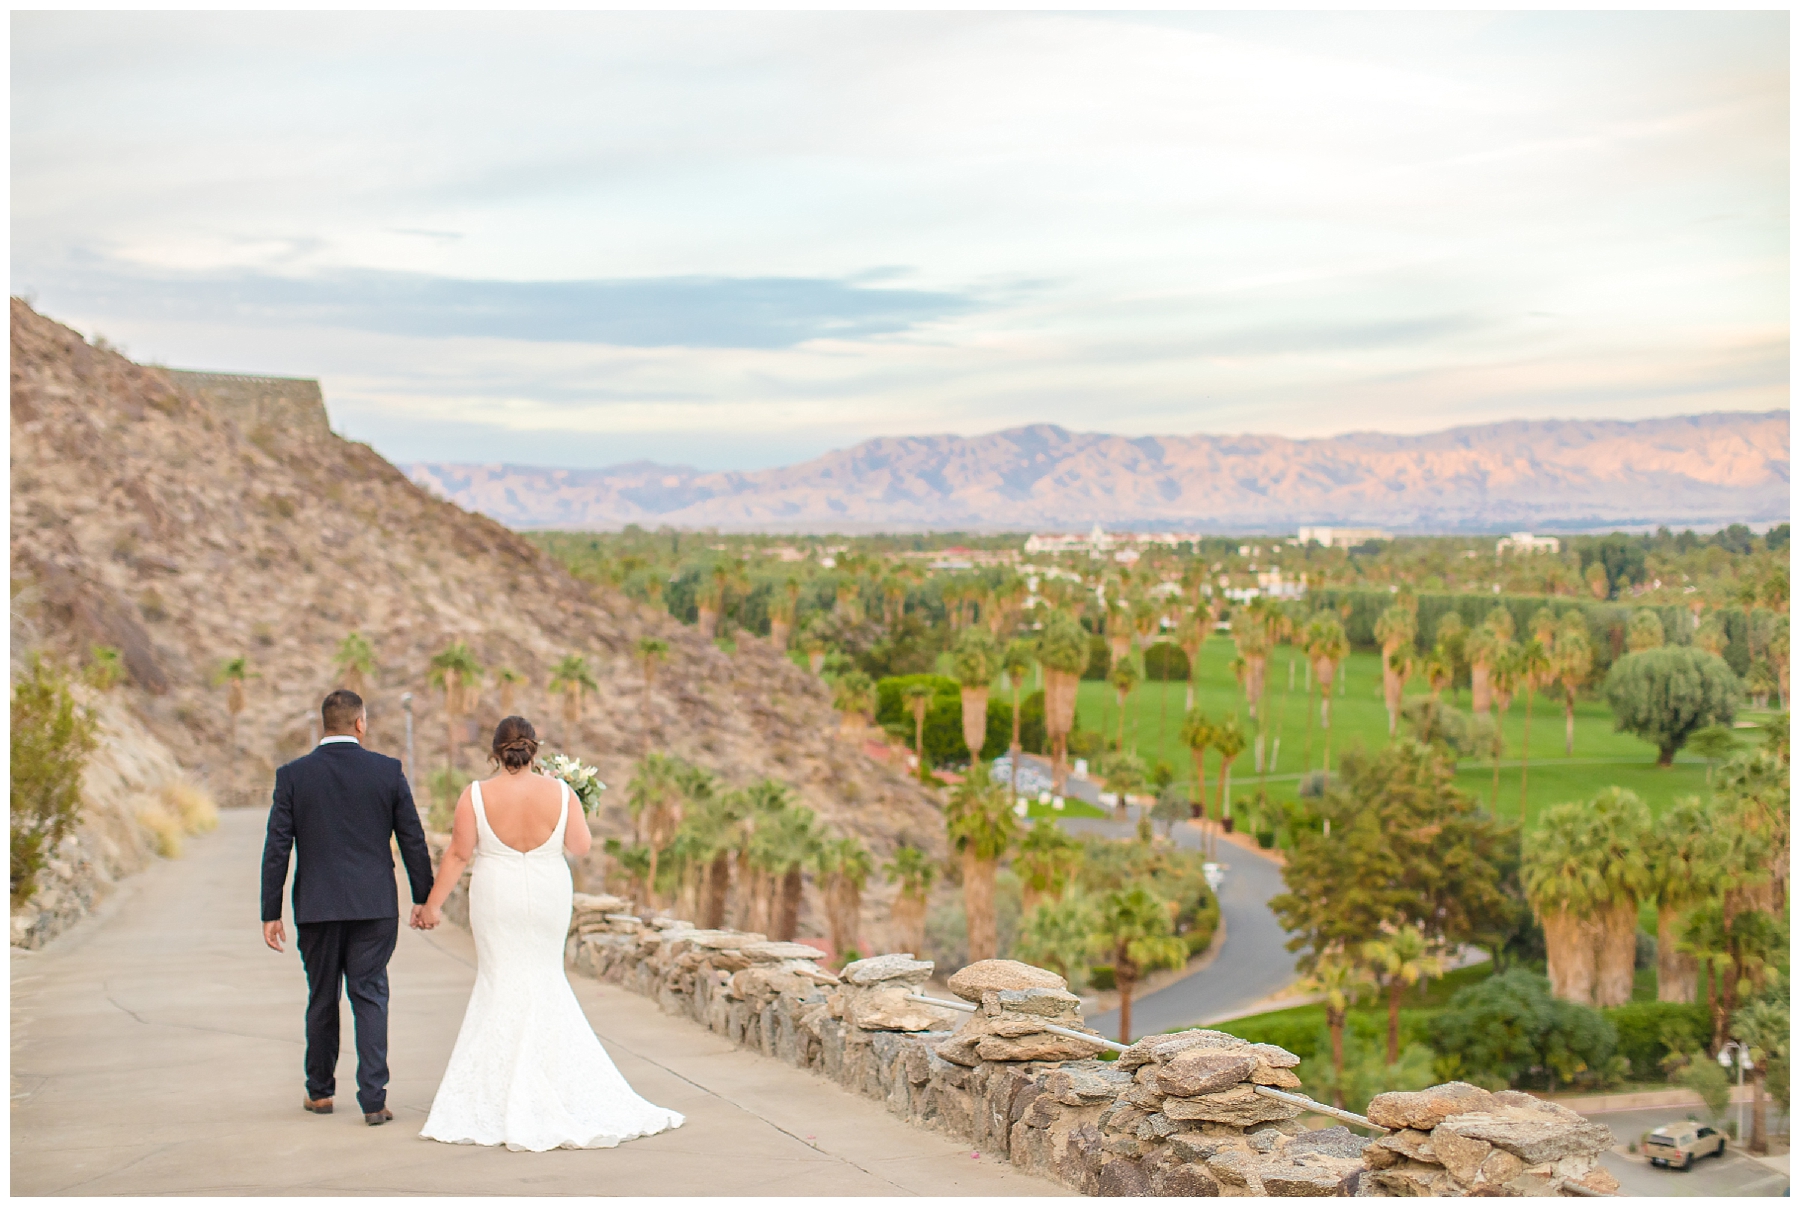 O'Donnell house wedding Palm Springs photographer